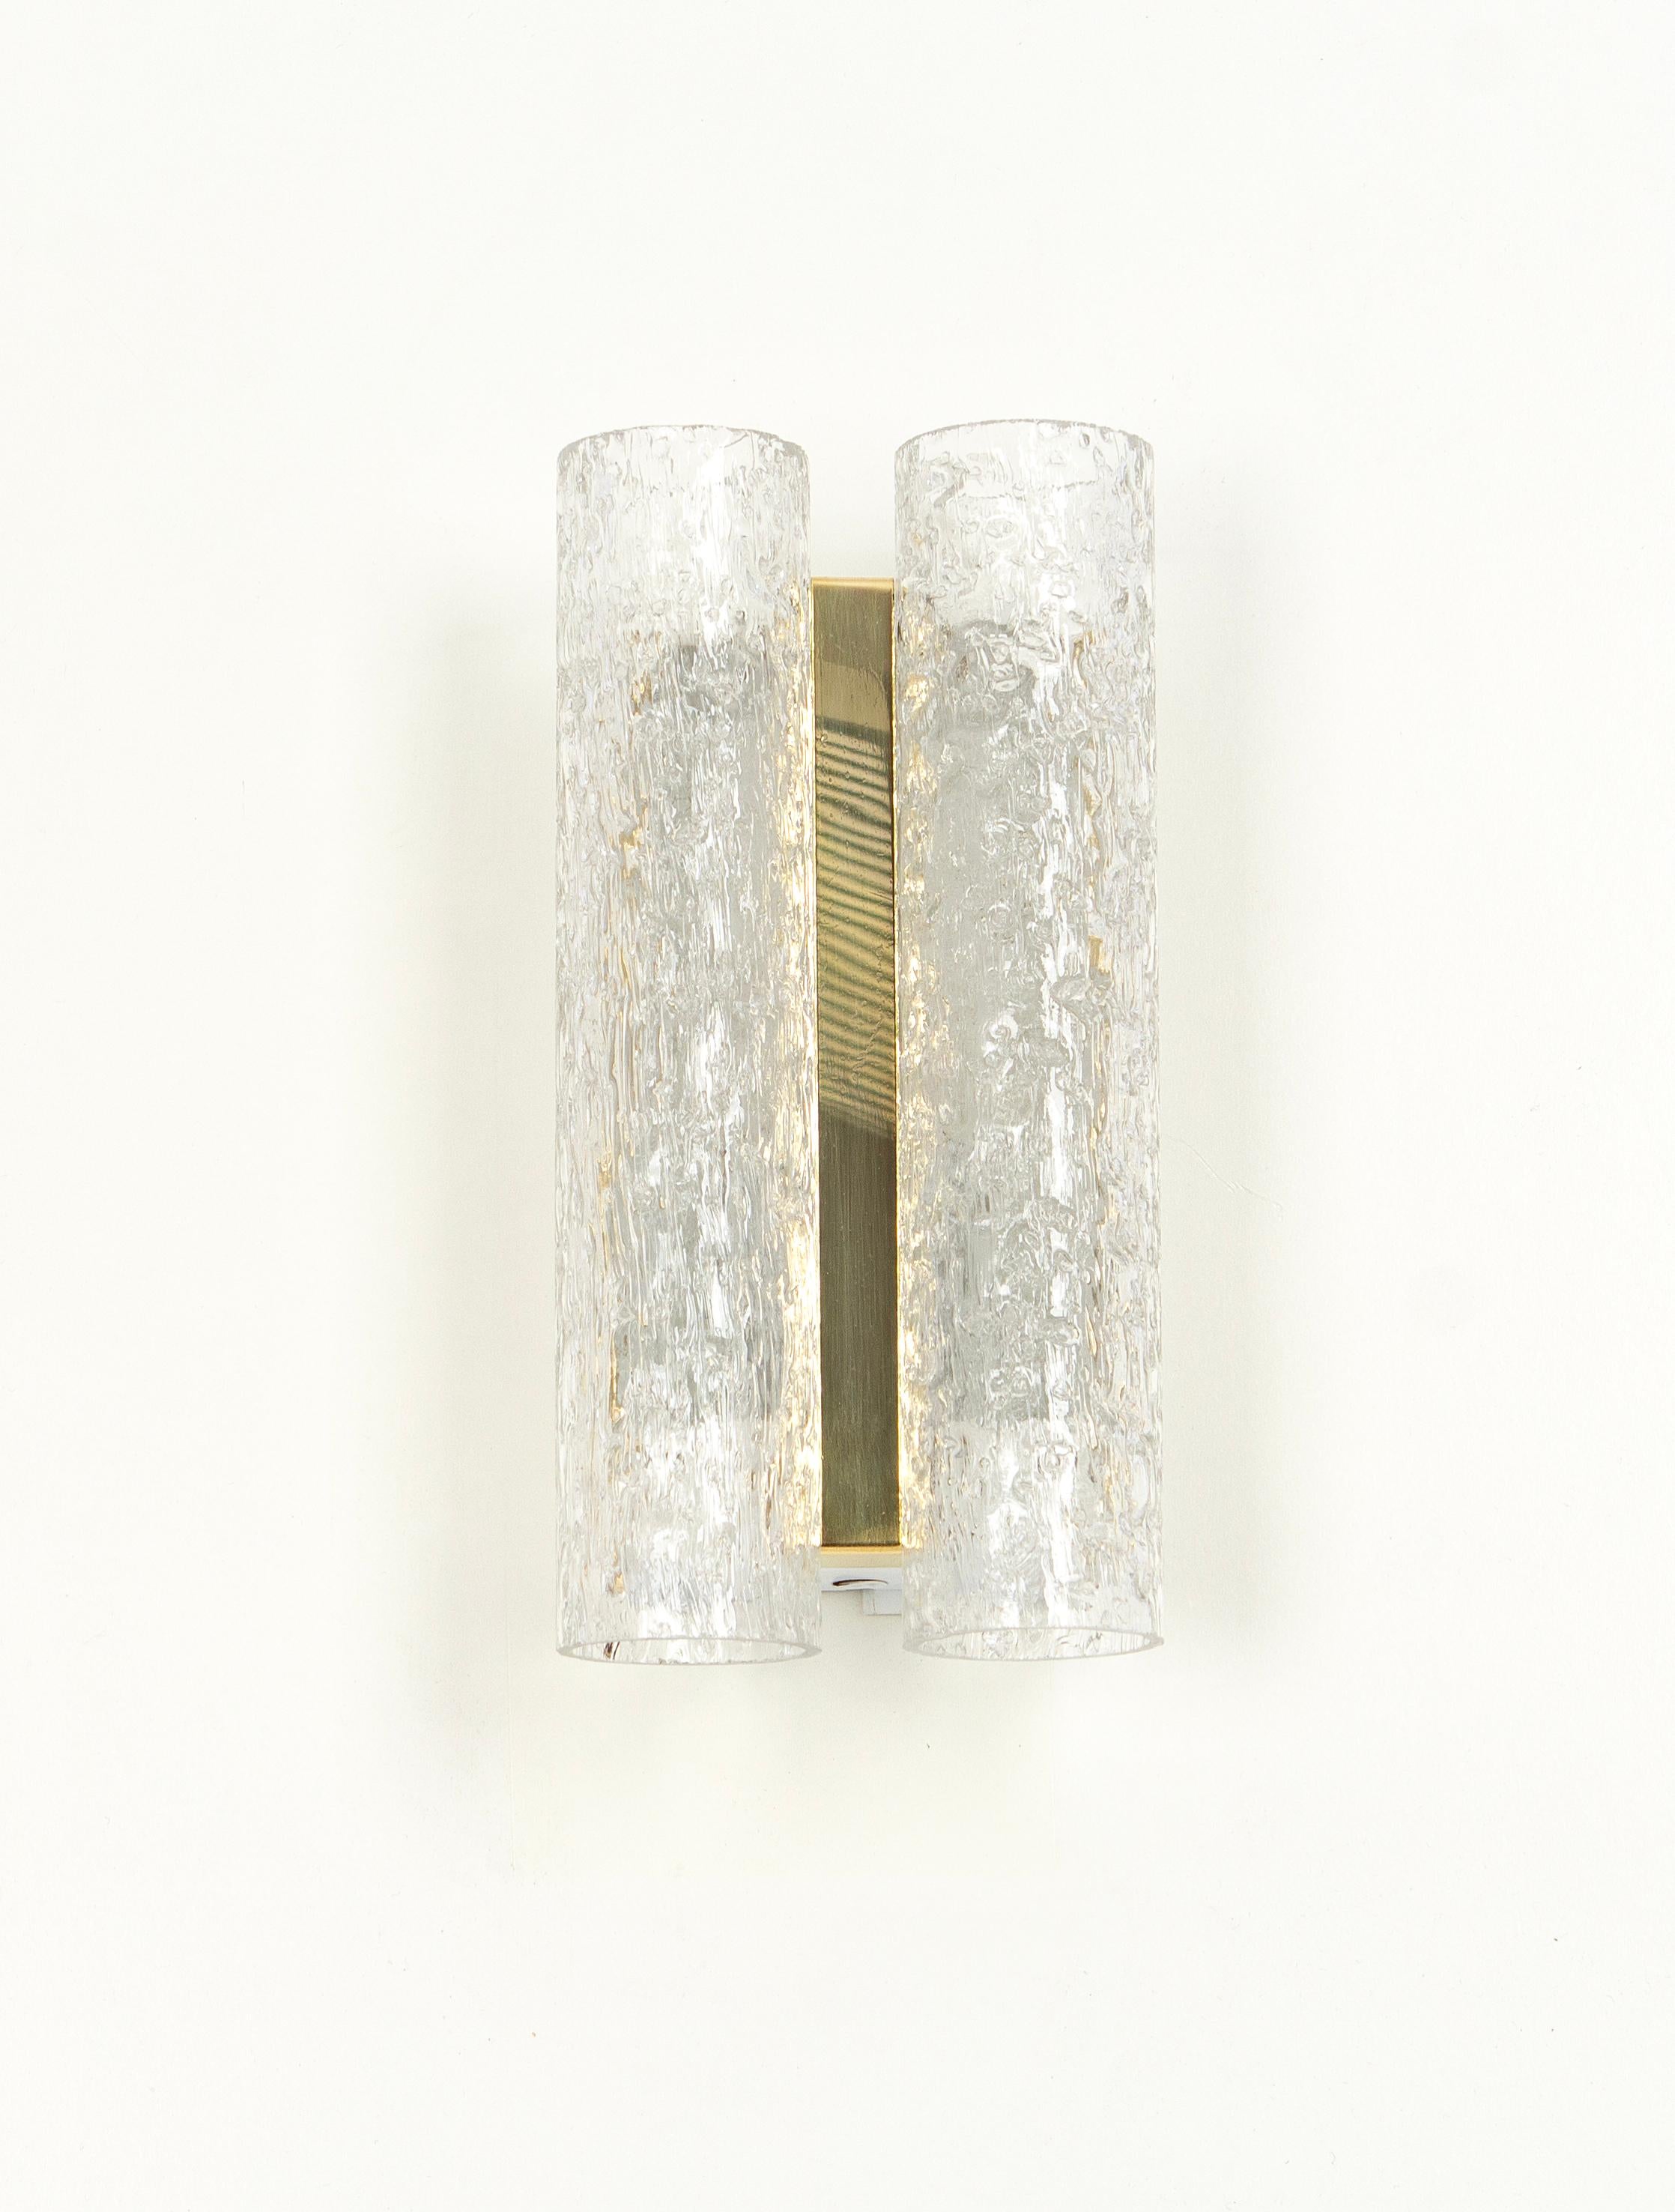 Pair of Brass or Ice Glass Wall Sconces by Doria, Germany, 1960s For Sale 1